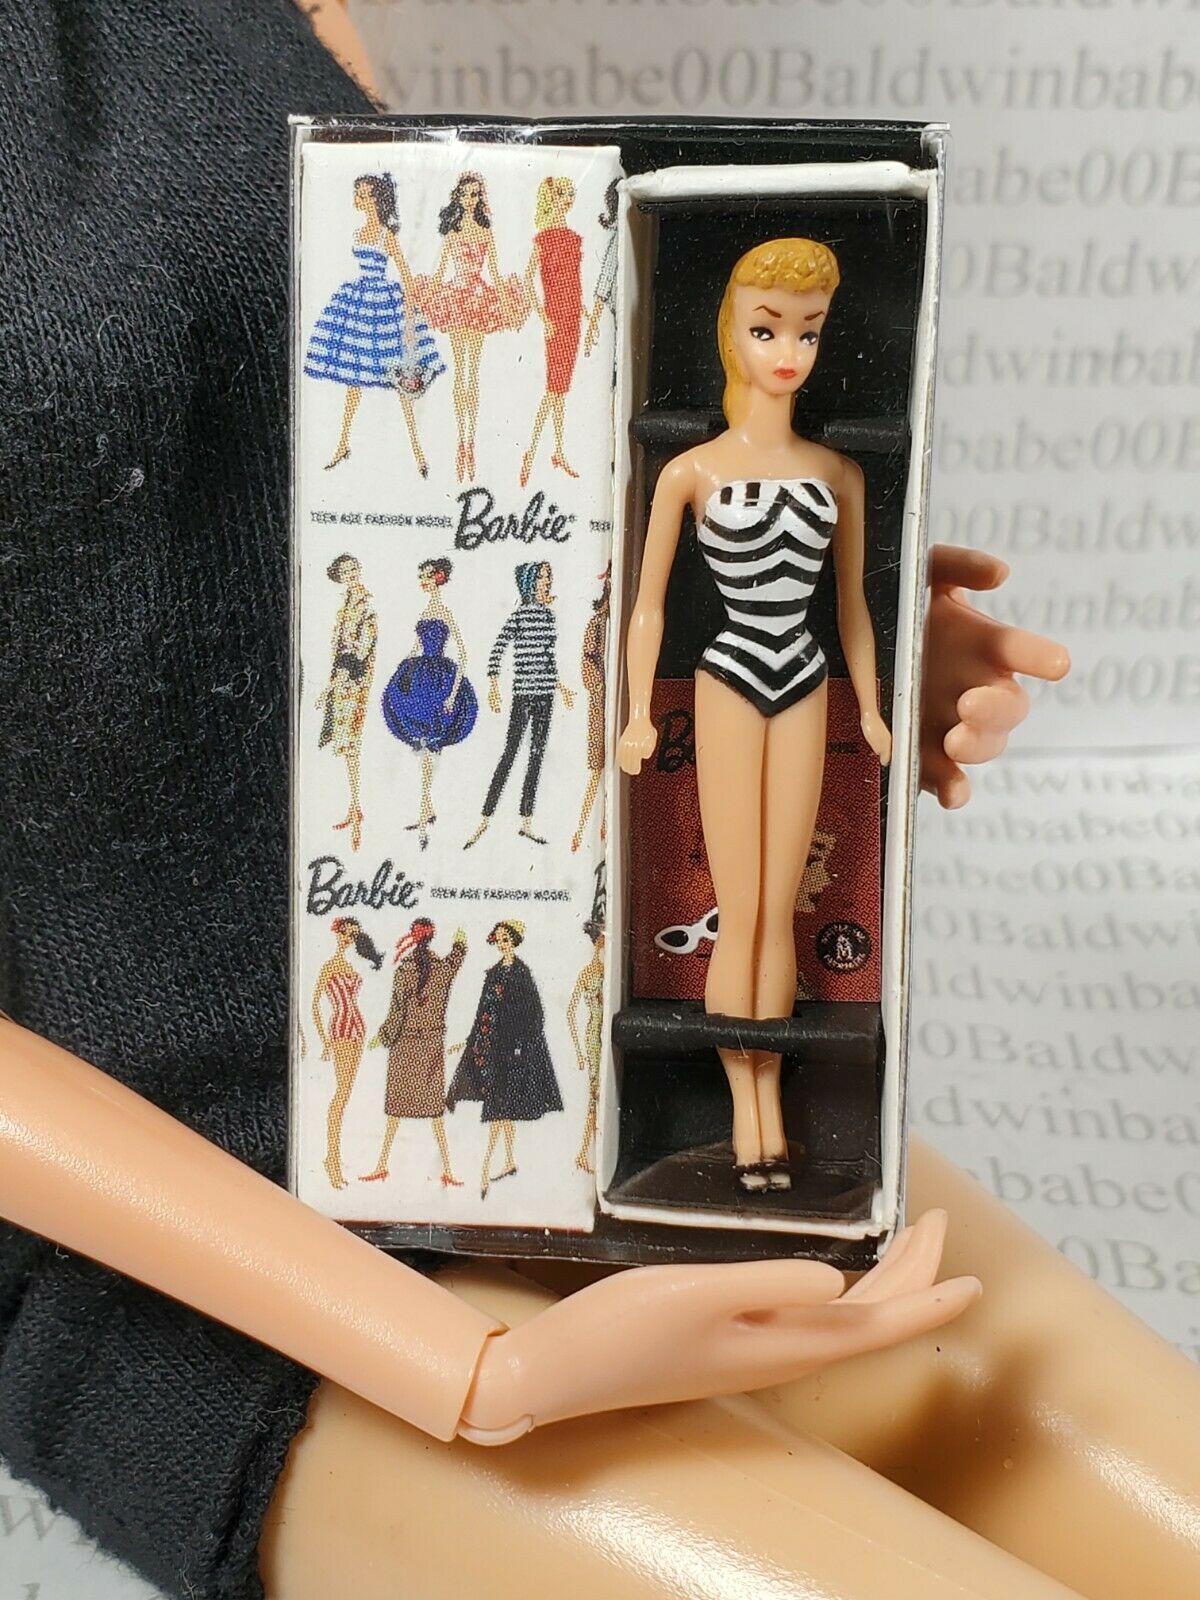 Misc ~ Miniature Ponytail Doll ~ Barbie 40th Anniversary Accessory For Diorama